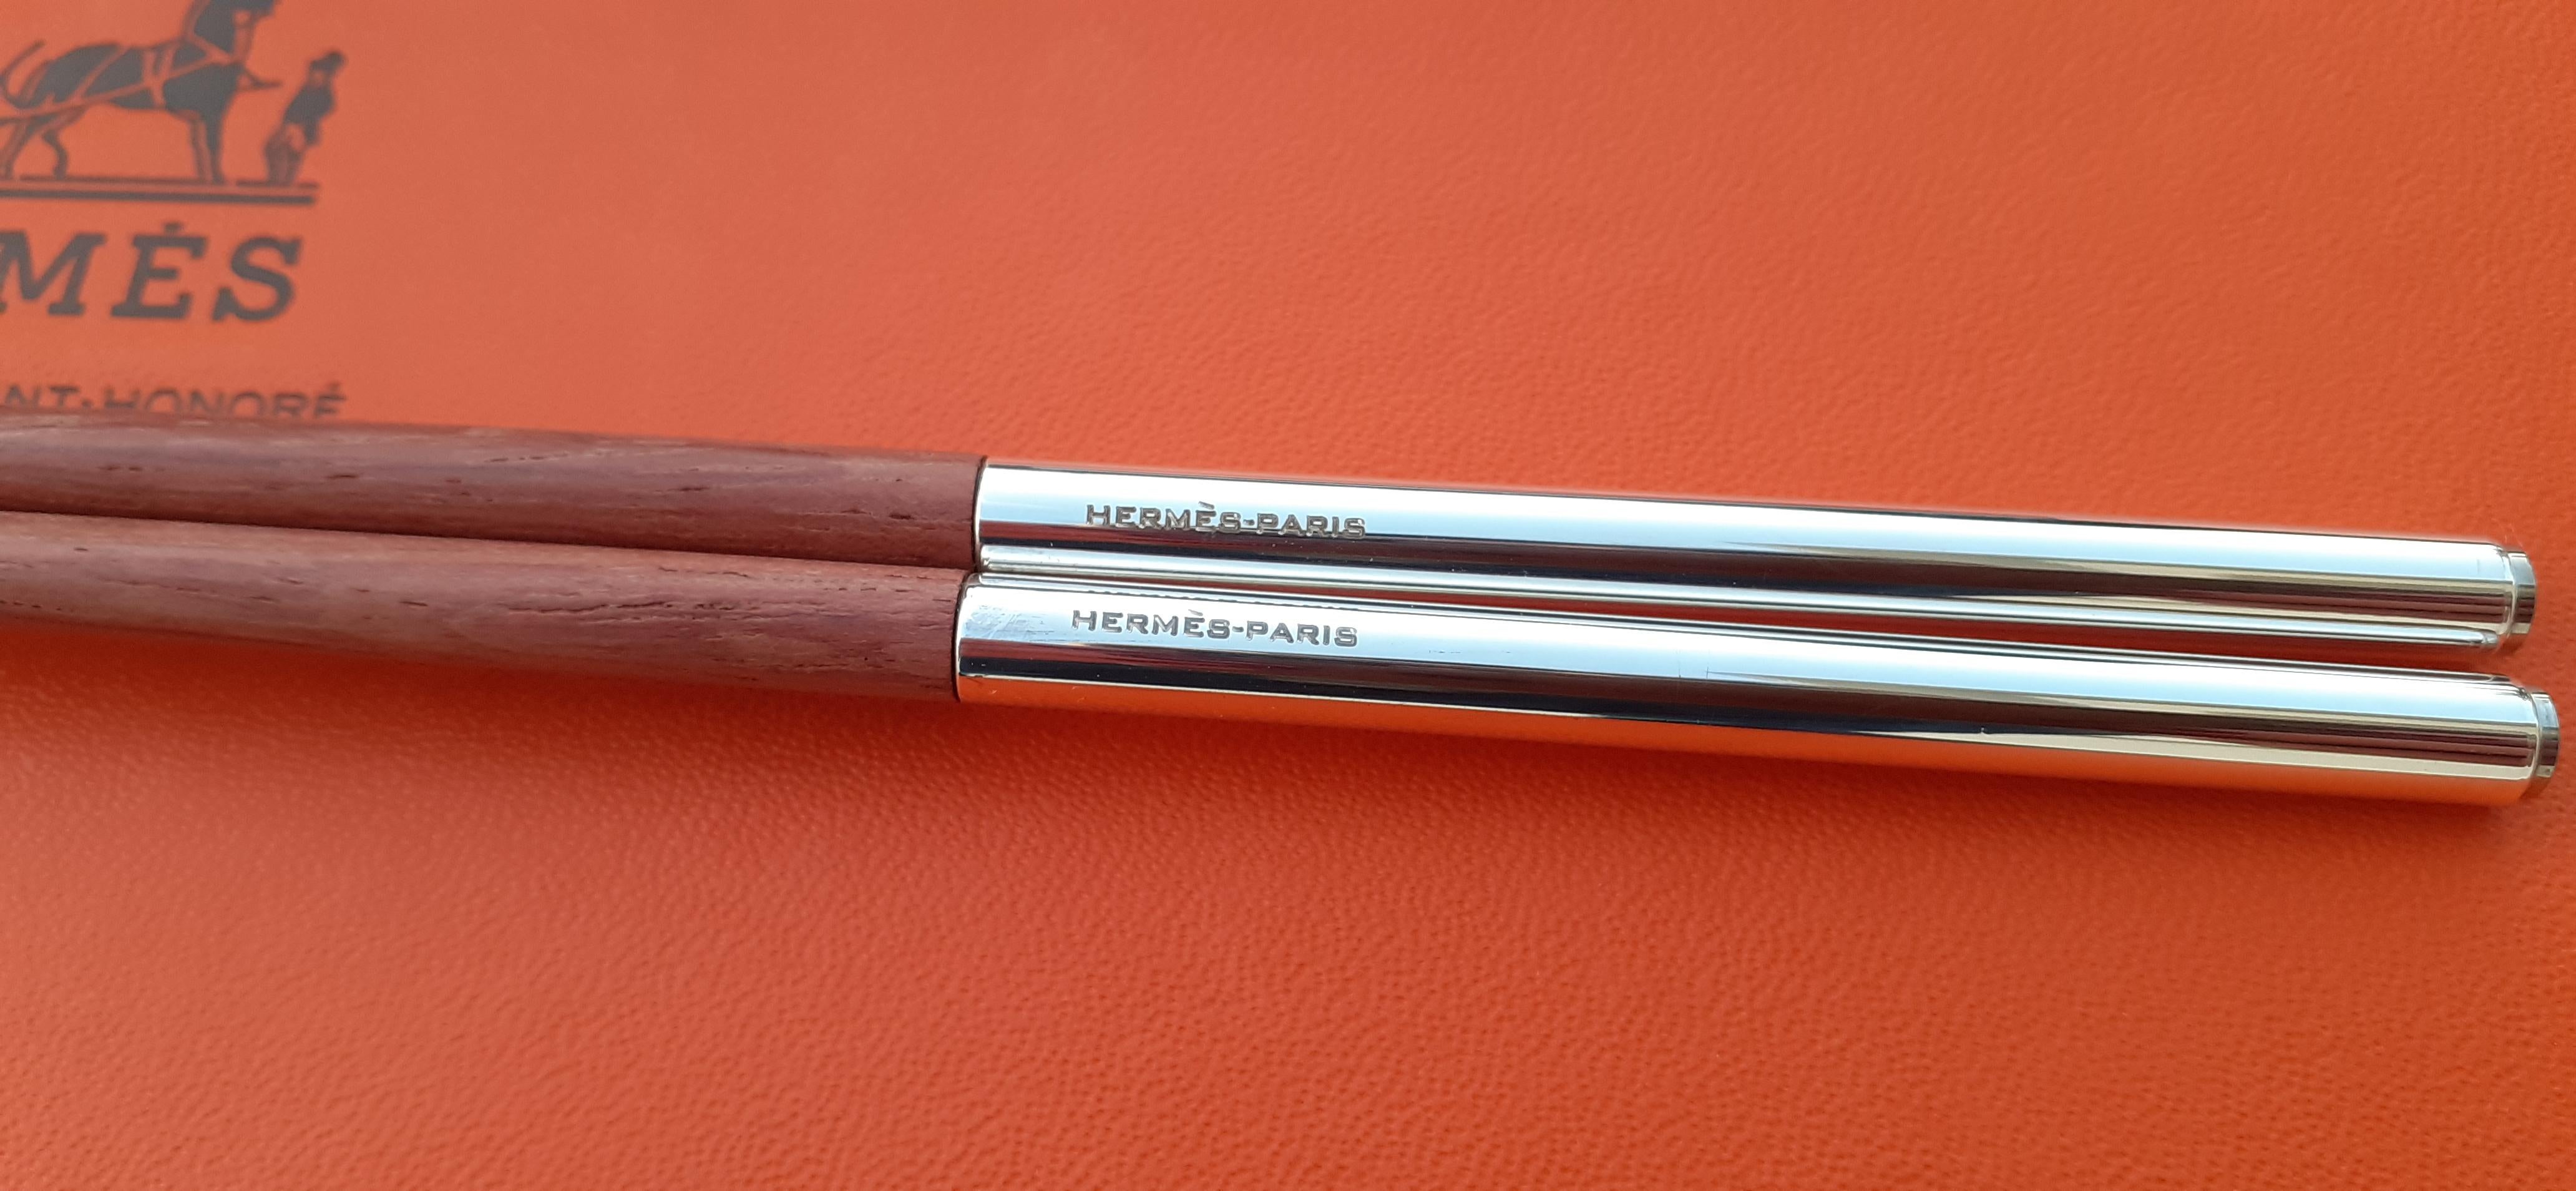 Exceptional Hermès Set of 2 pairs of Chopsticks in wood For Sale 1